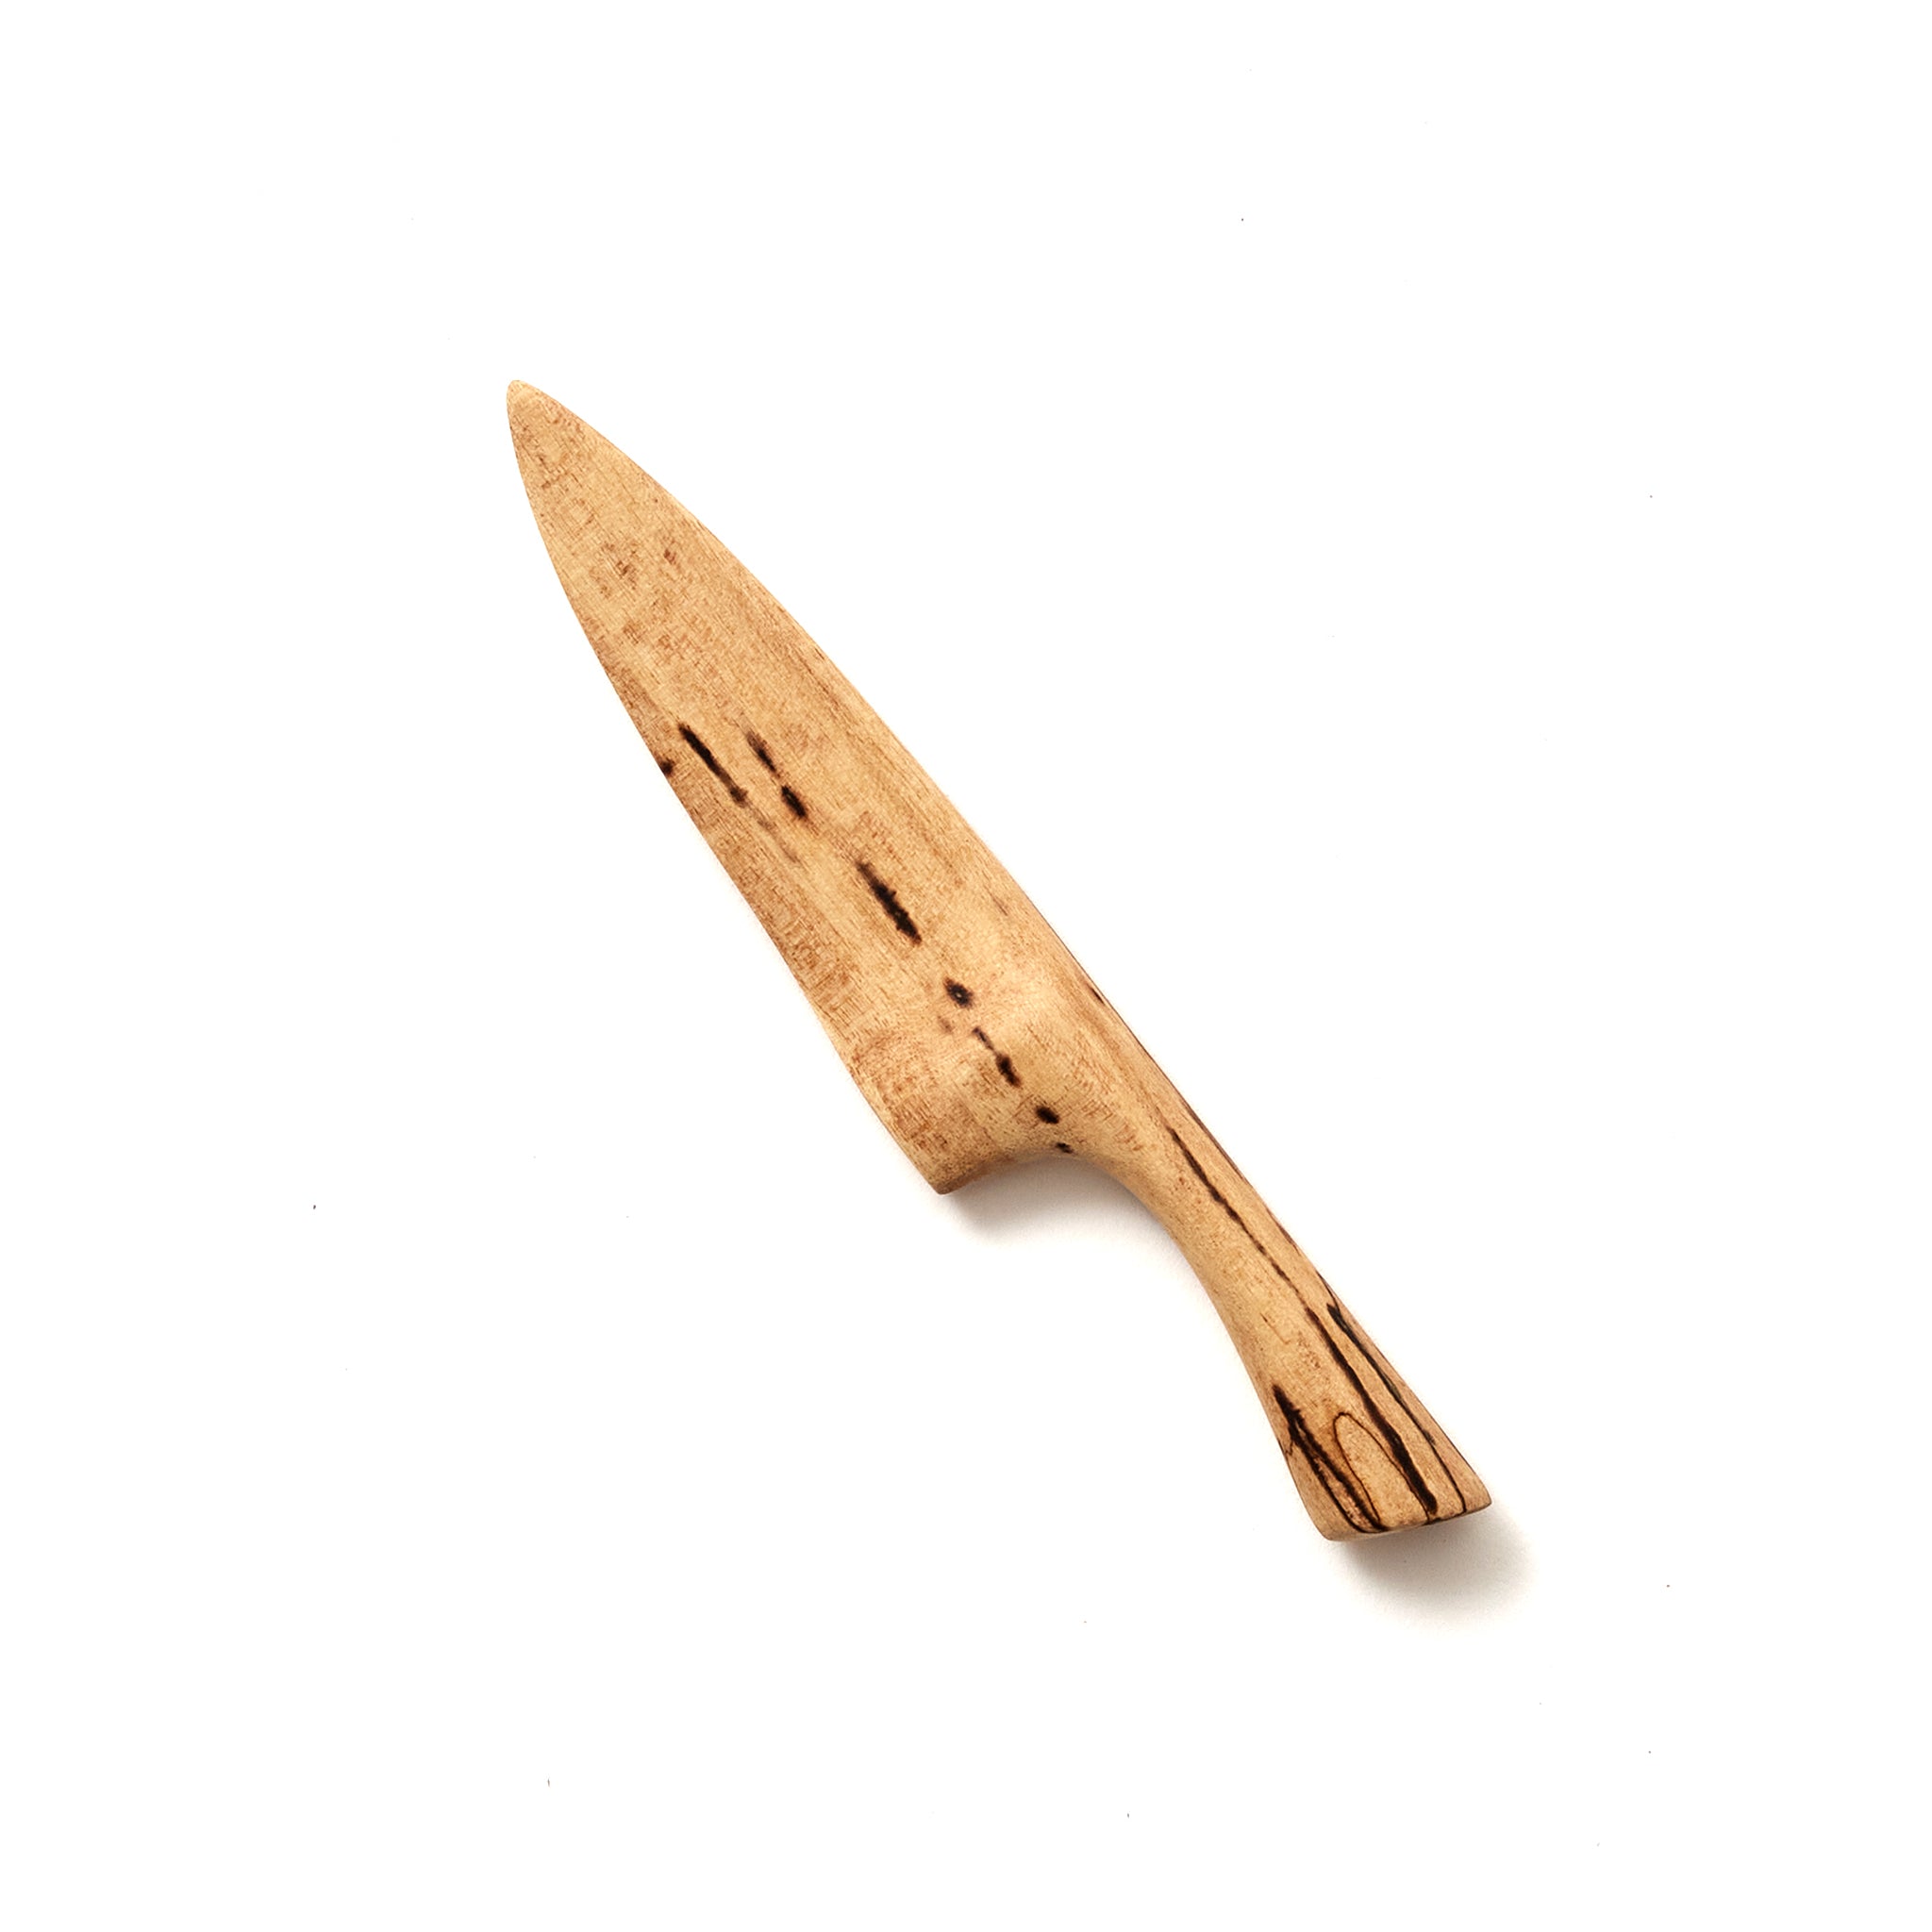 A simple wooden knife with a pointed tip and a handle, featuring dark grain patterns against a lighter wood tone. The knife is centered on a plain white background.